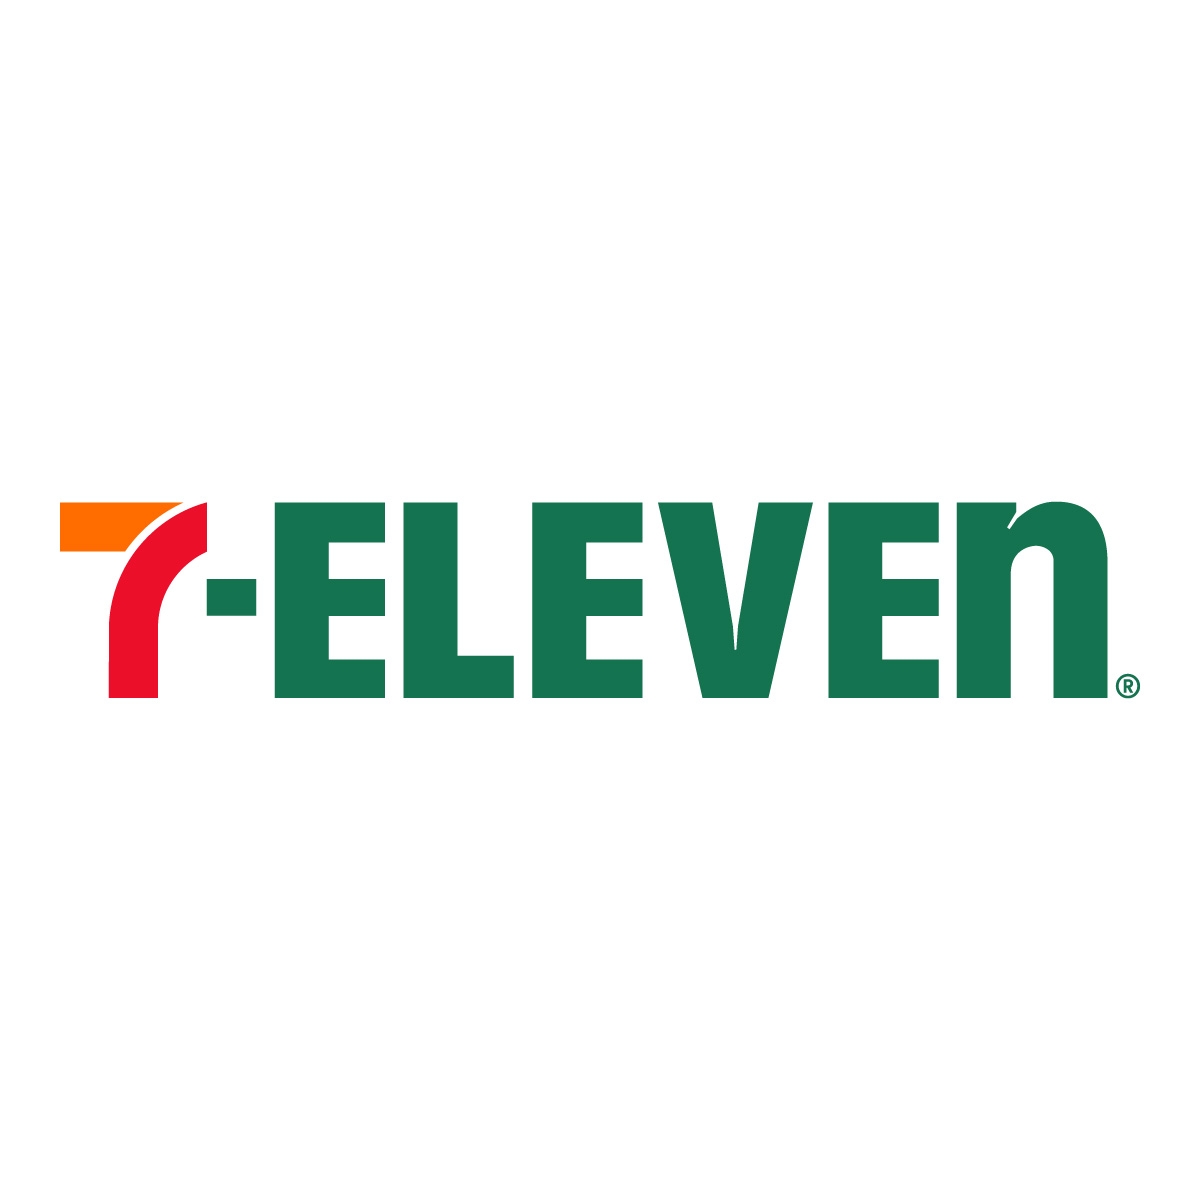 is 7 eleven halal in the United States?